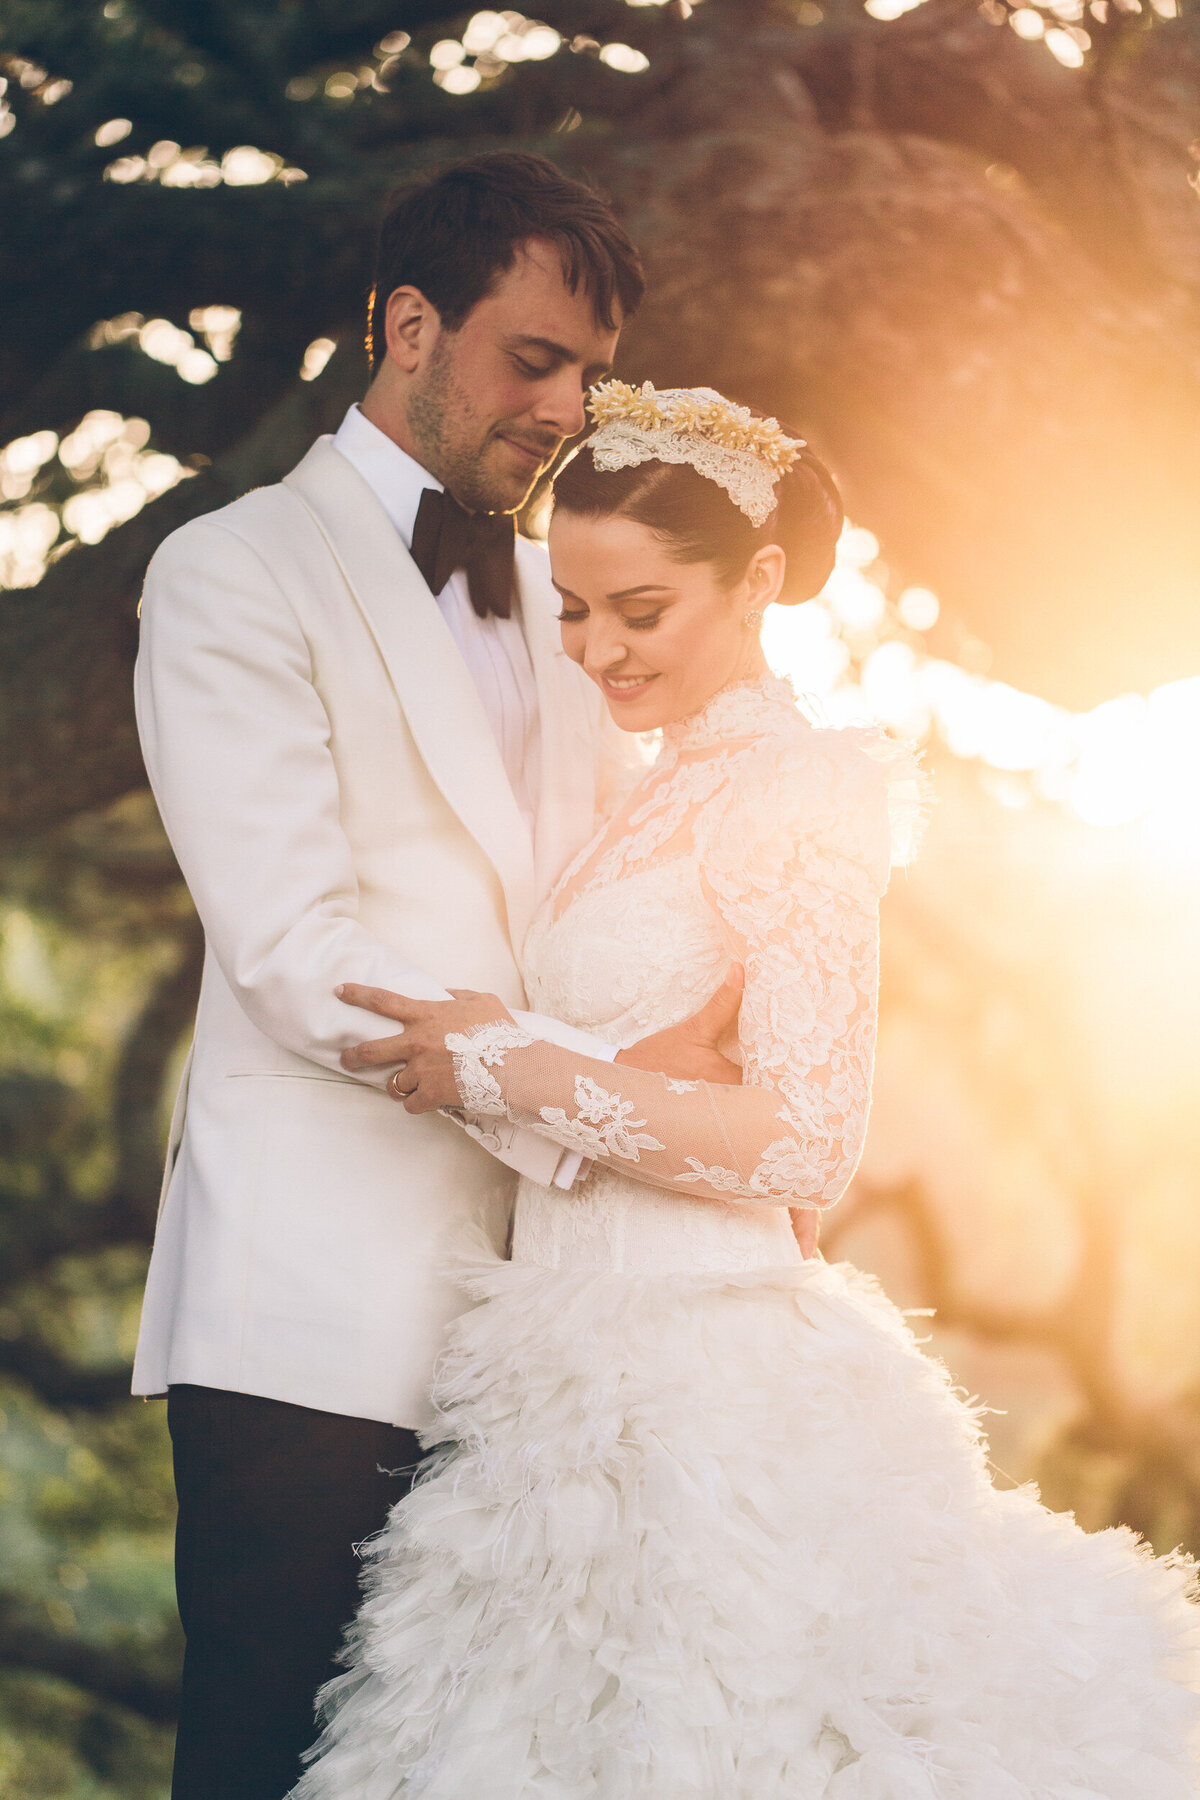 A photograph in color of Emma and John on their wedding day at Hearst Ranch in San Simeon, California. The bride and groom are in front of an old oak tree with the sun glowing from behind them. They are facing each other, the groom’s arms on her waist and the bride’s hand on his forearm. The groom is dressed in a white tuxedo jacket, black tie and black pants and he’s looking down at the bride. The bride is wearing an Alexander McQueen wedding dress with a bodice of lace with long sleeves and a long neckline along with a flowing skirt made with feathers. She wears a crown of lace and pearls. She is looking down and smiling. Wedding photography by Stacie McChesney/Vitae Weddings.